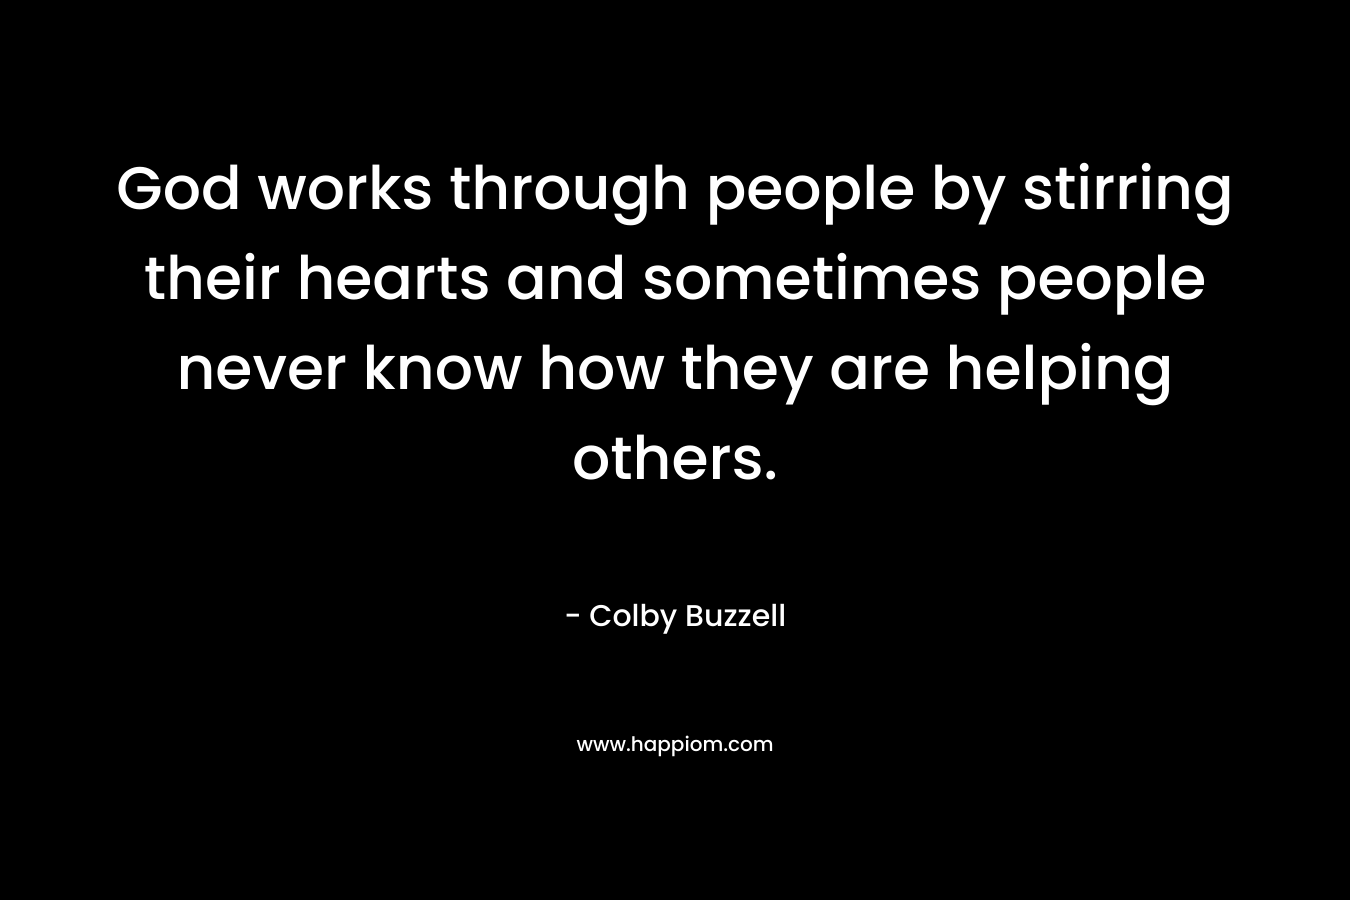 God works through people by stirring their hearts and sometimes people never know how they are helping others. – Colby Buzzell